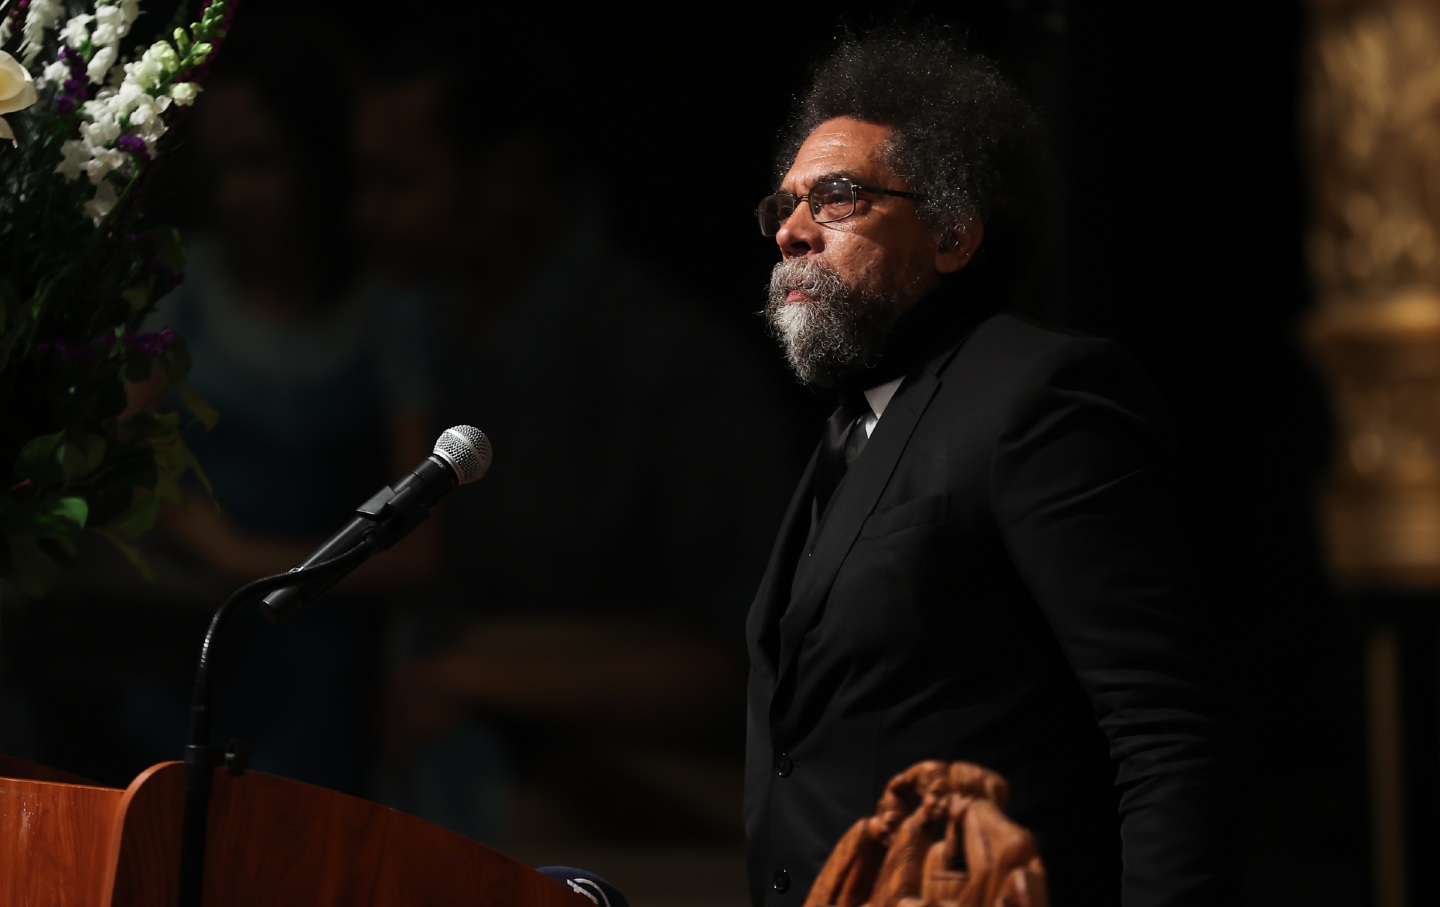 Cornel West speaking at a lectern